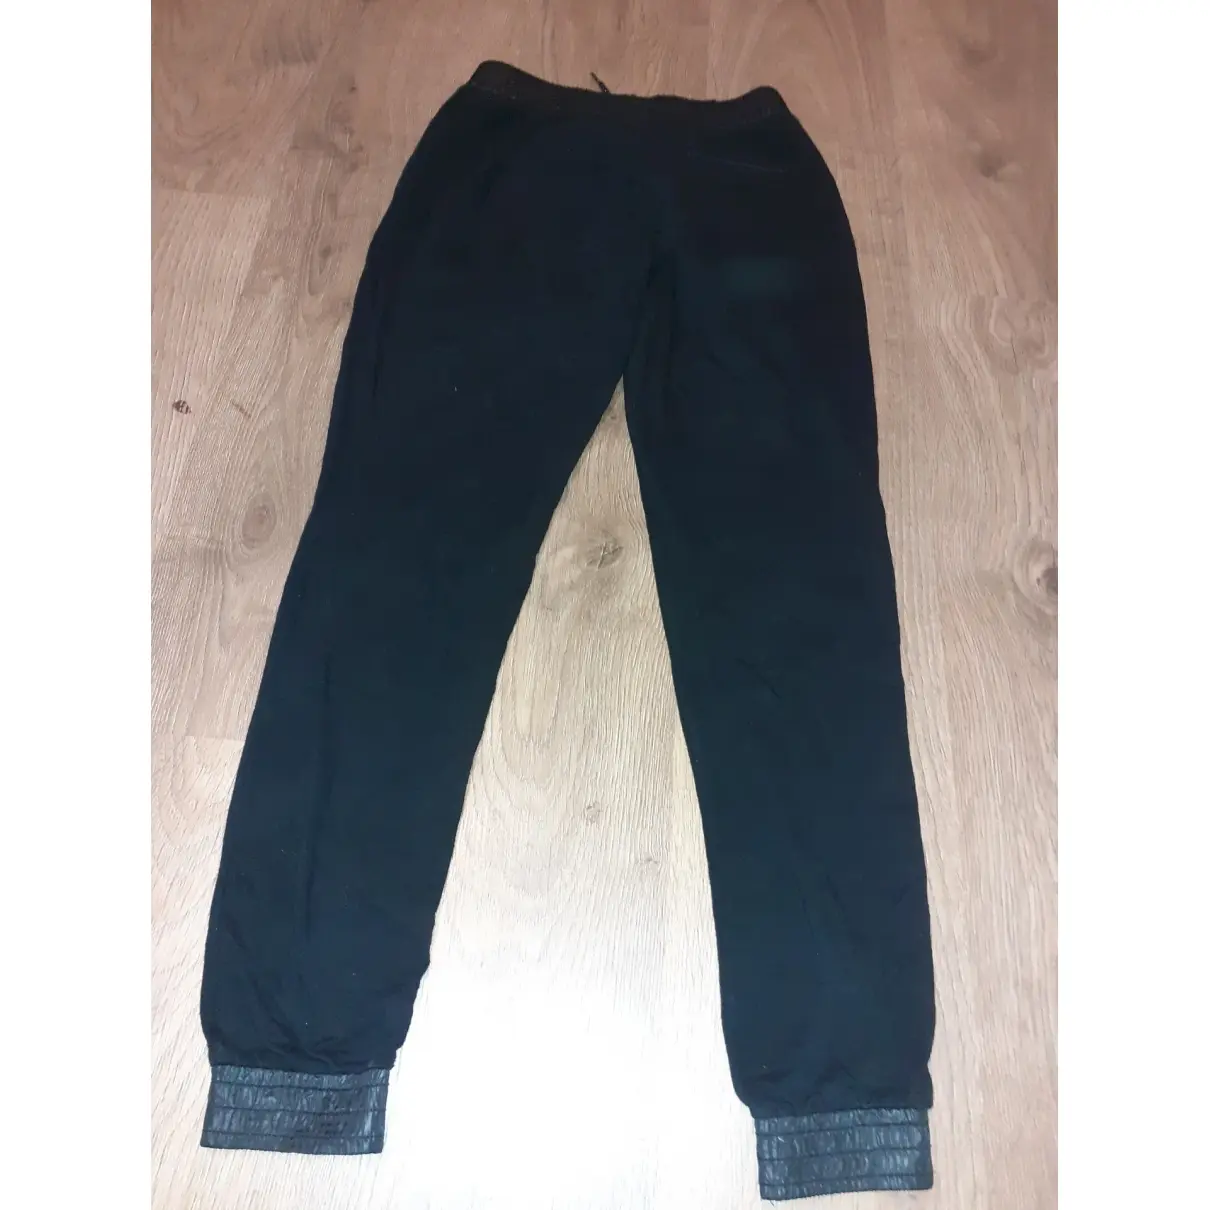 Dkny Trousers for sale